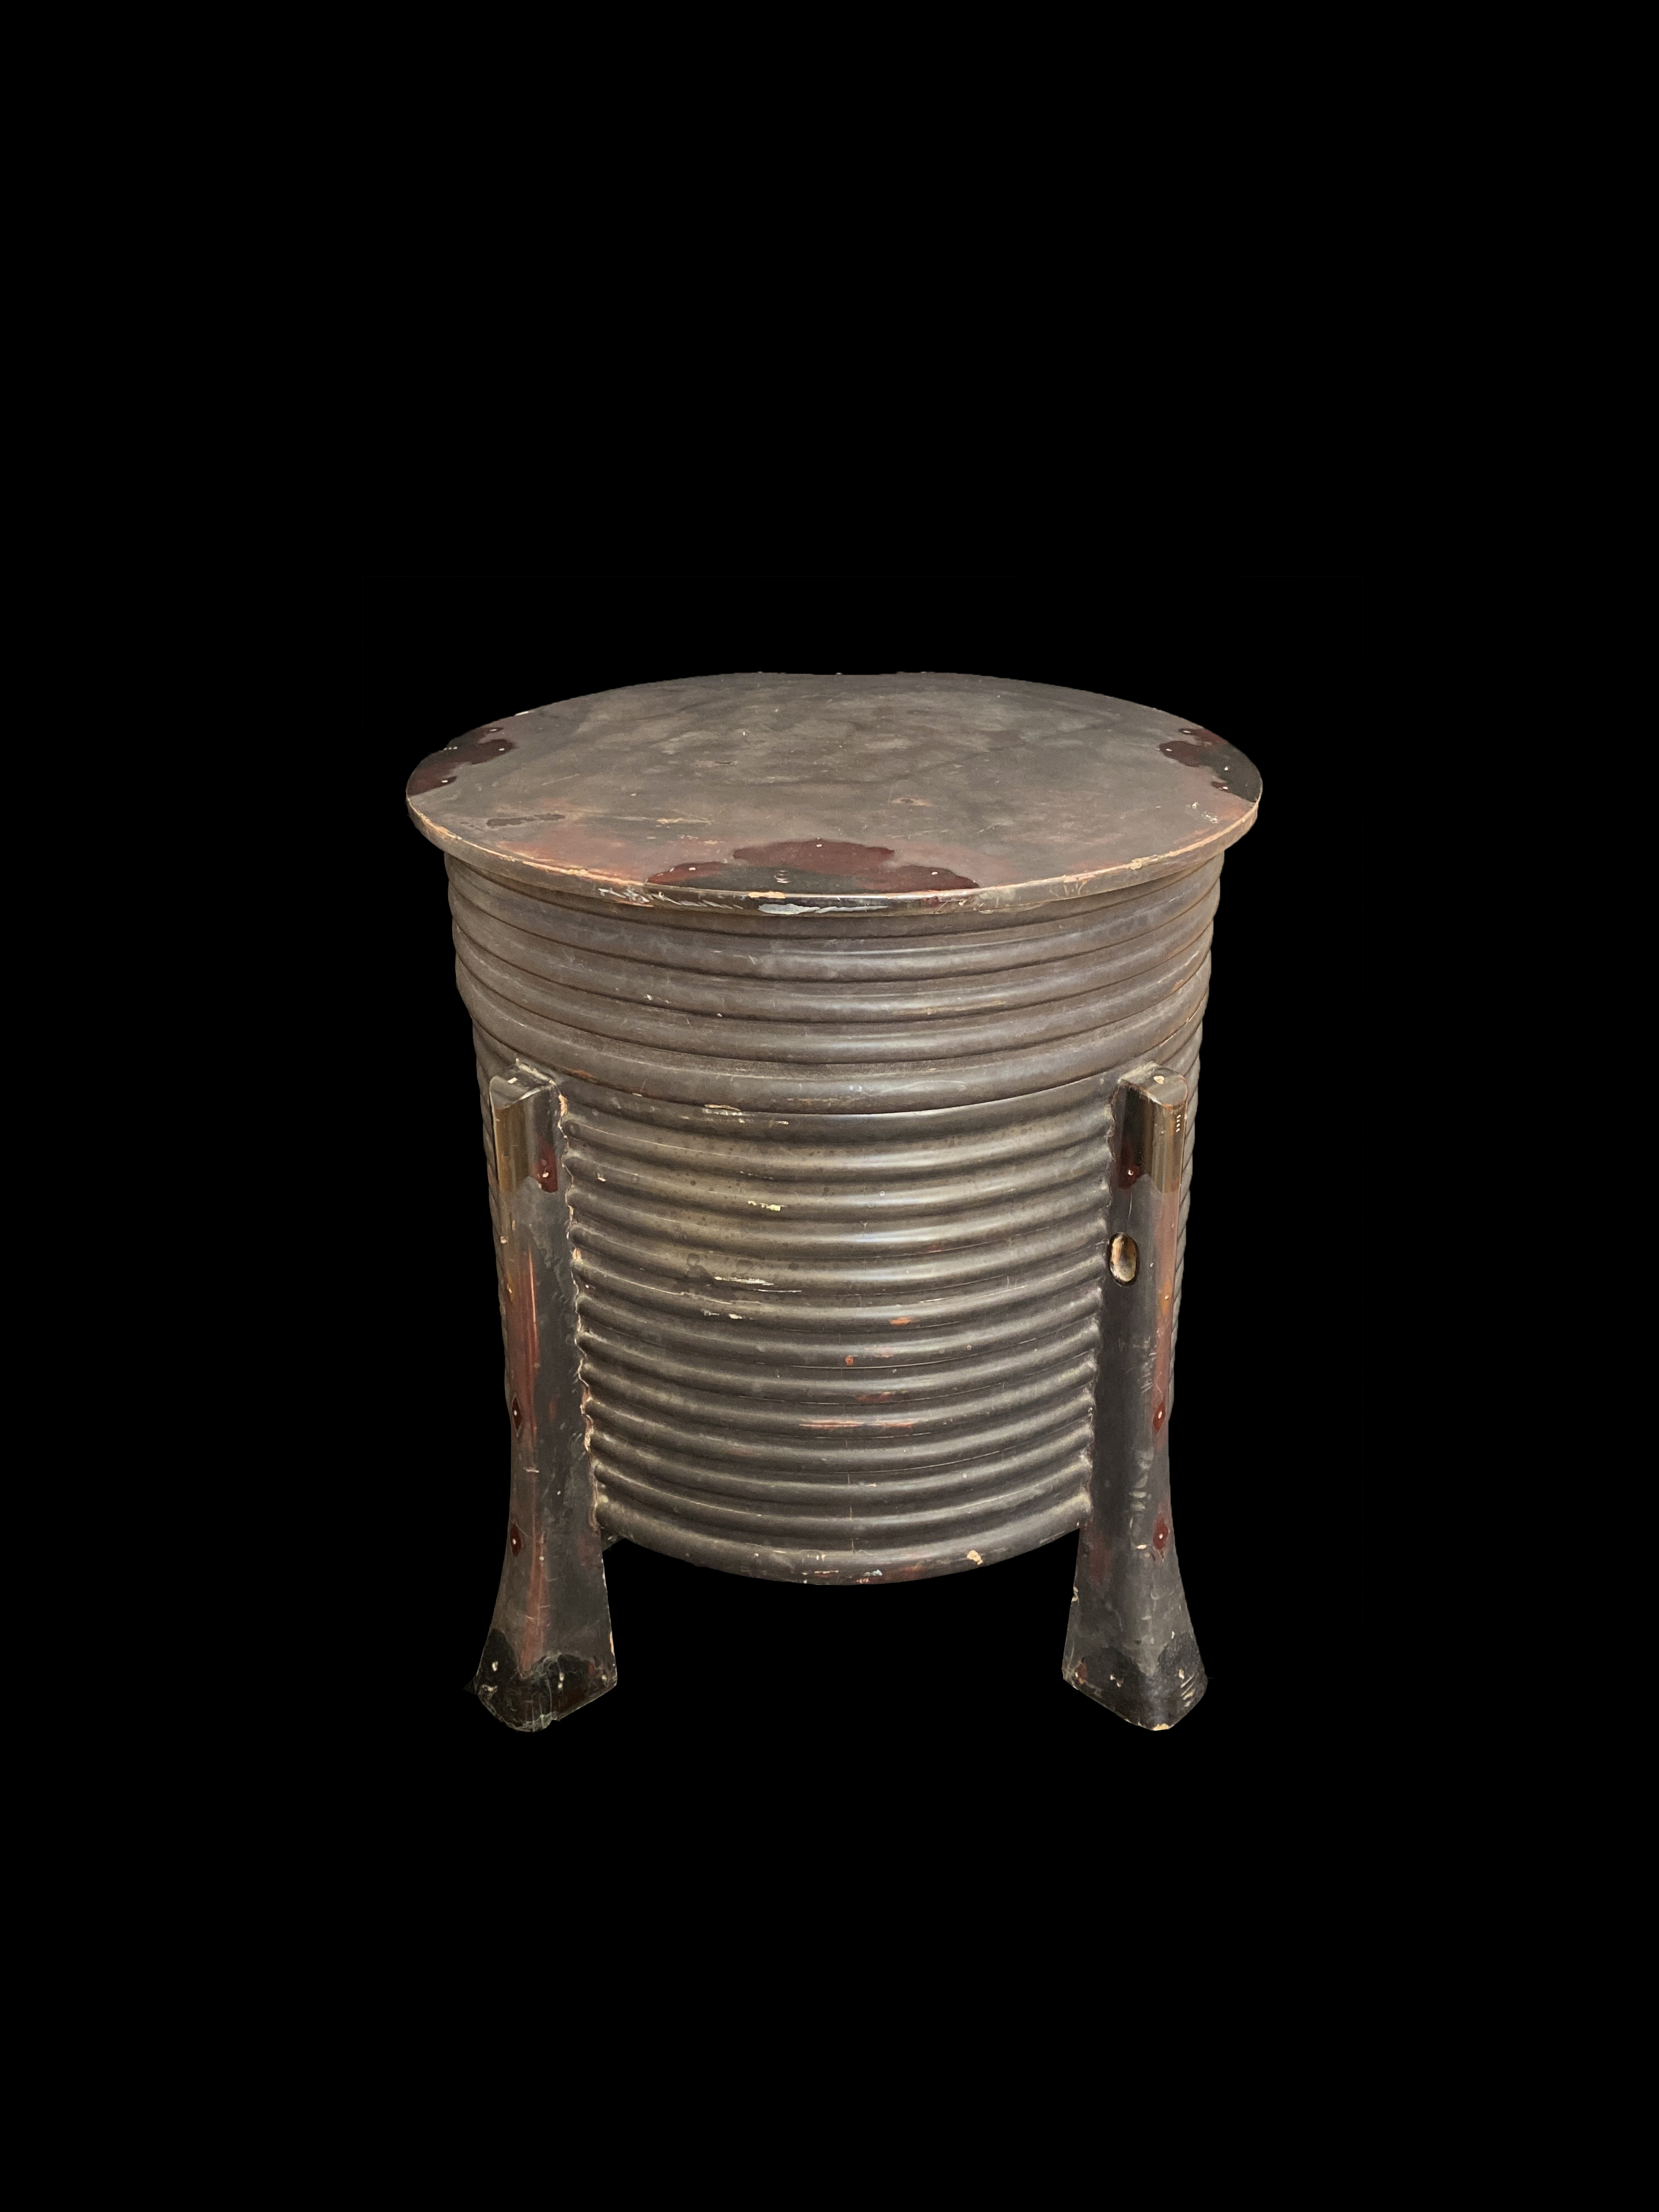 Antique Lidded Container - Asian